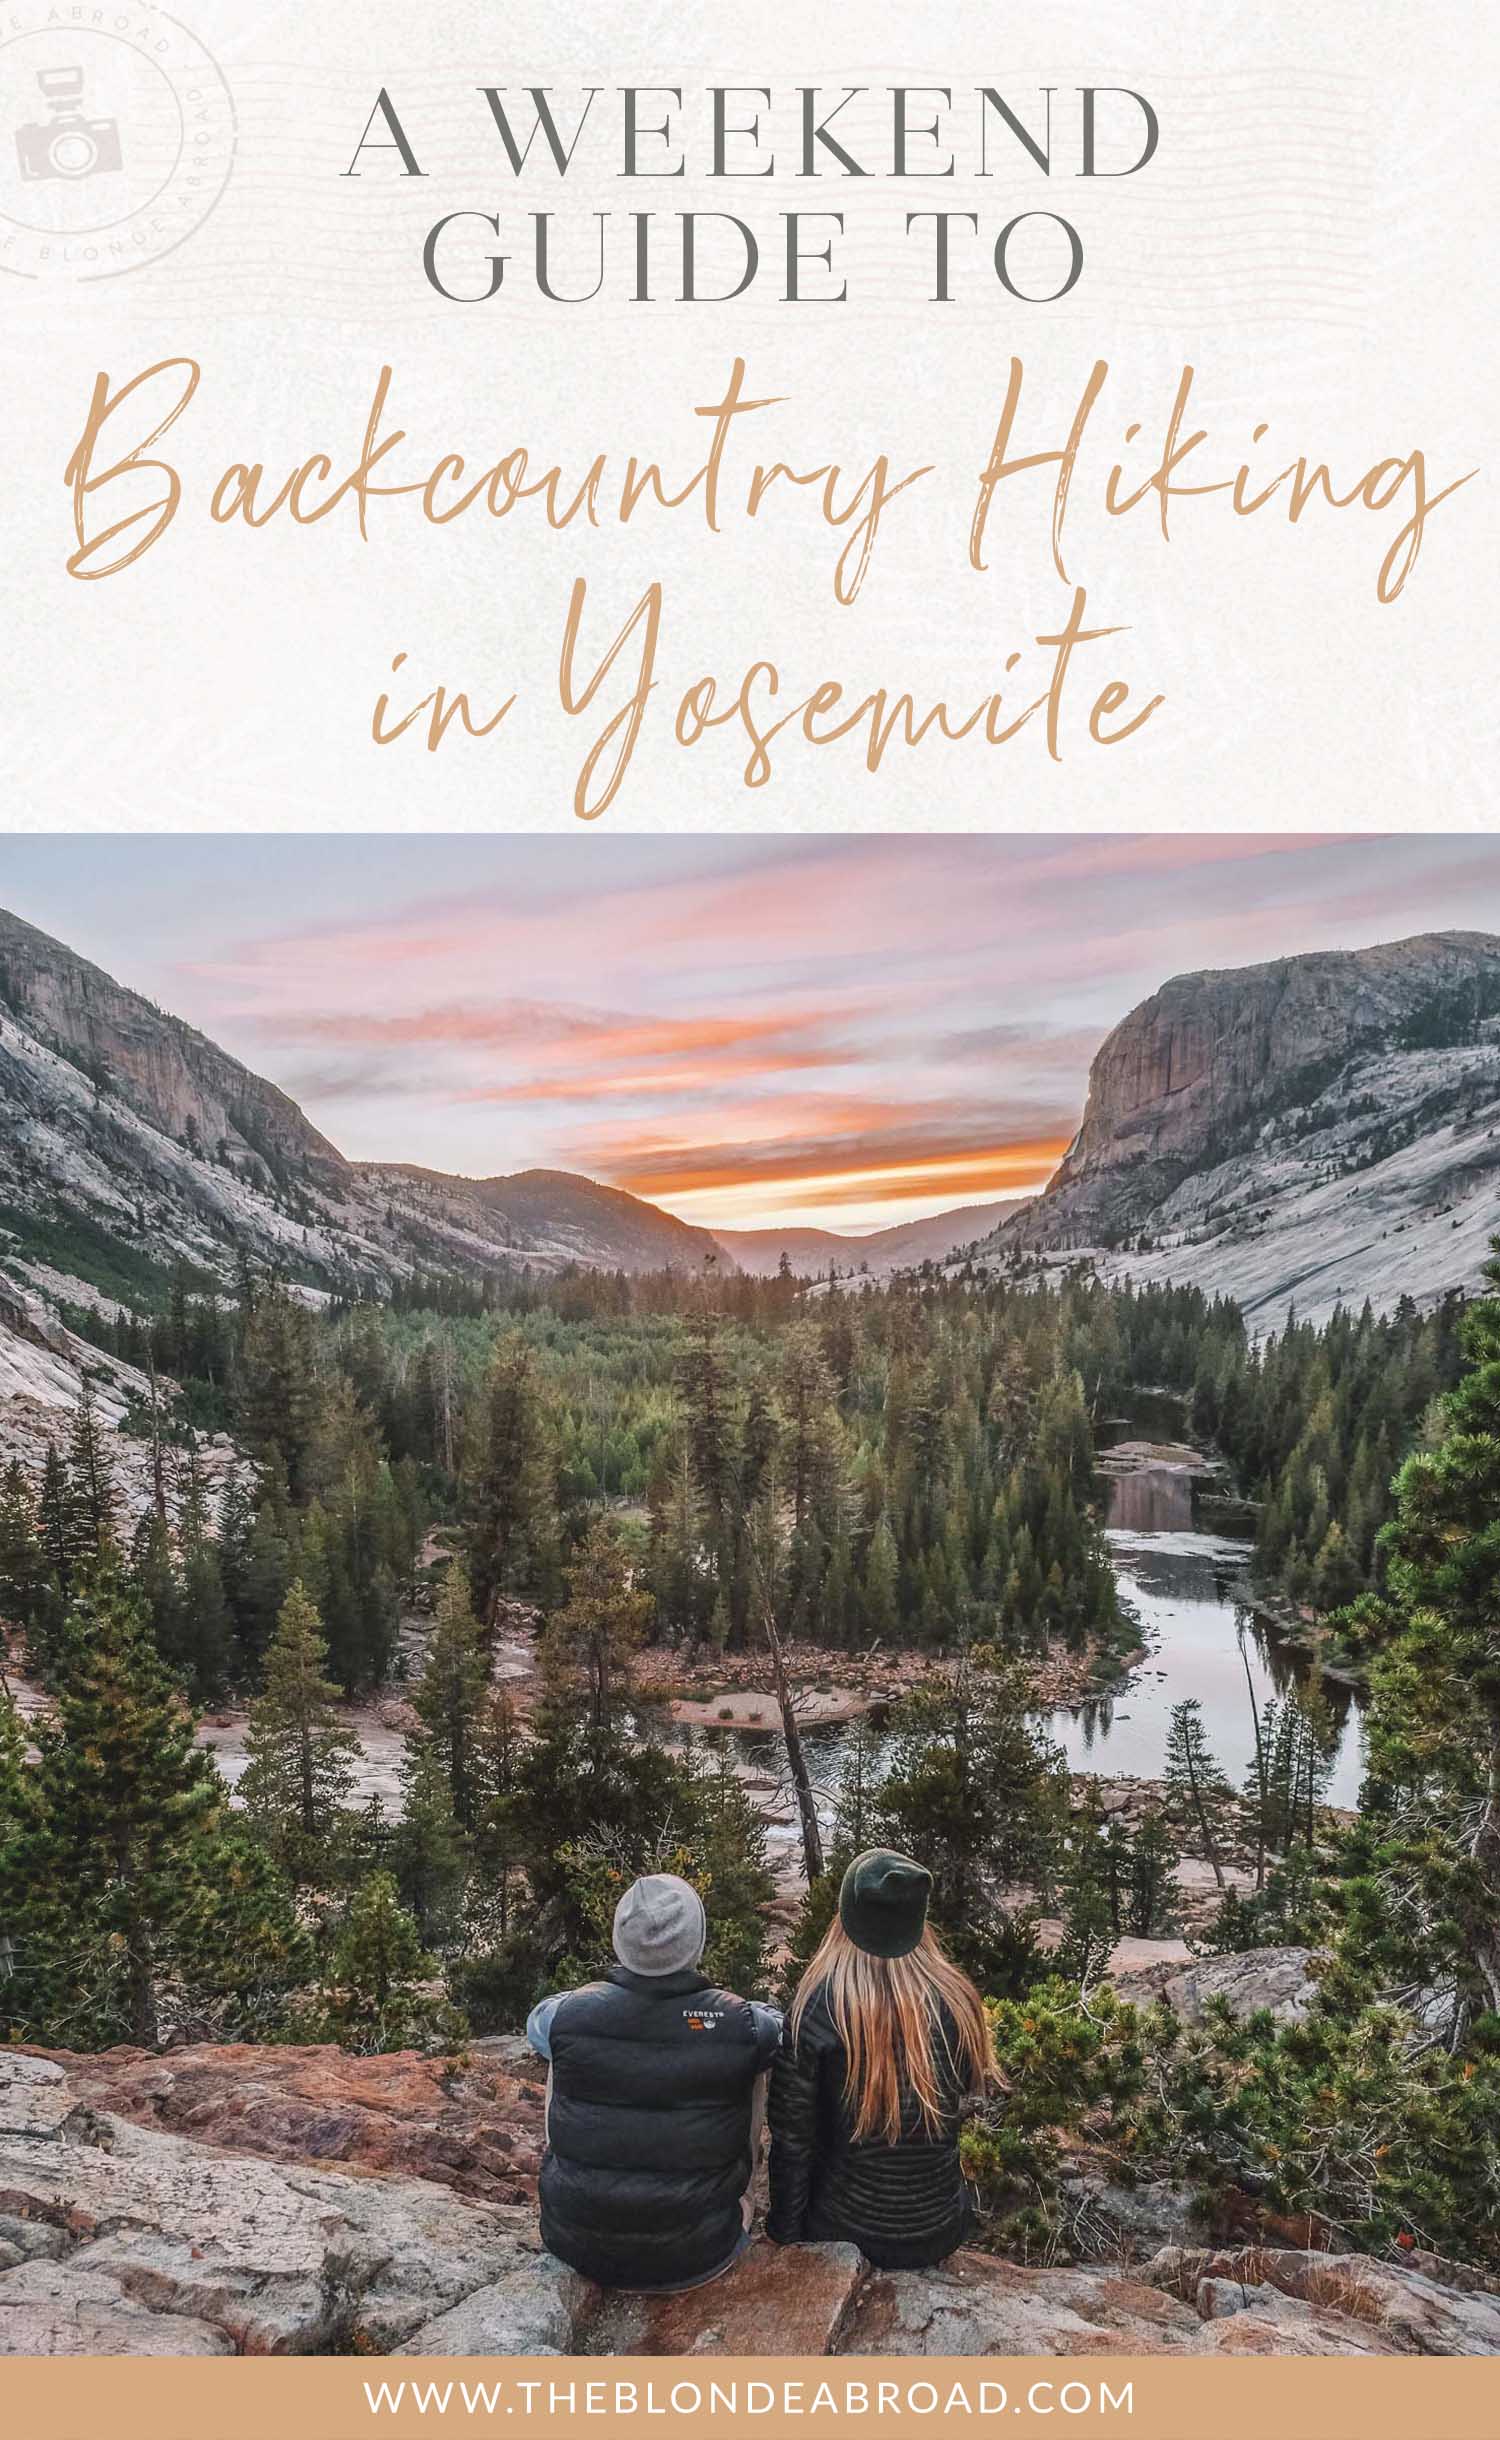 weekend guide to backcountry yosemite